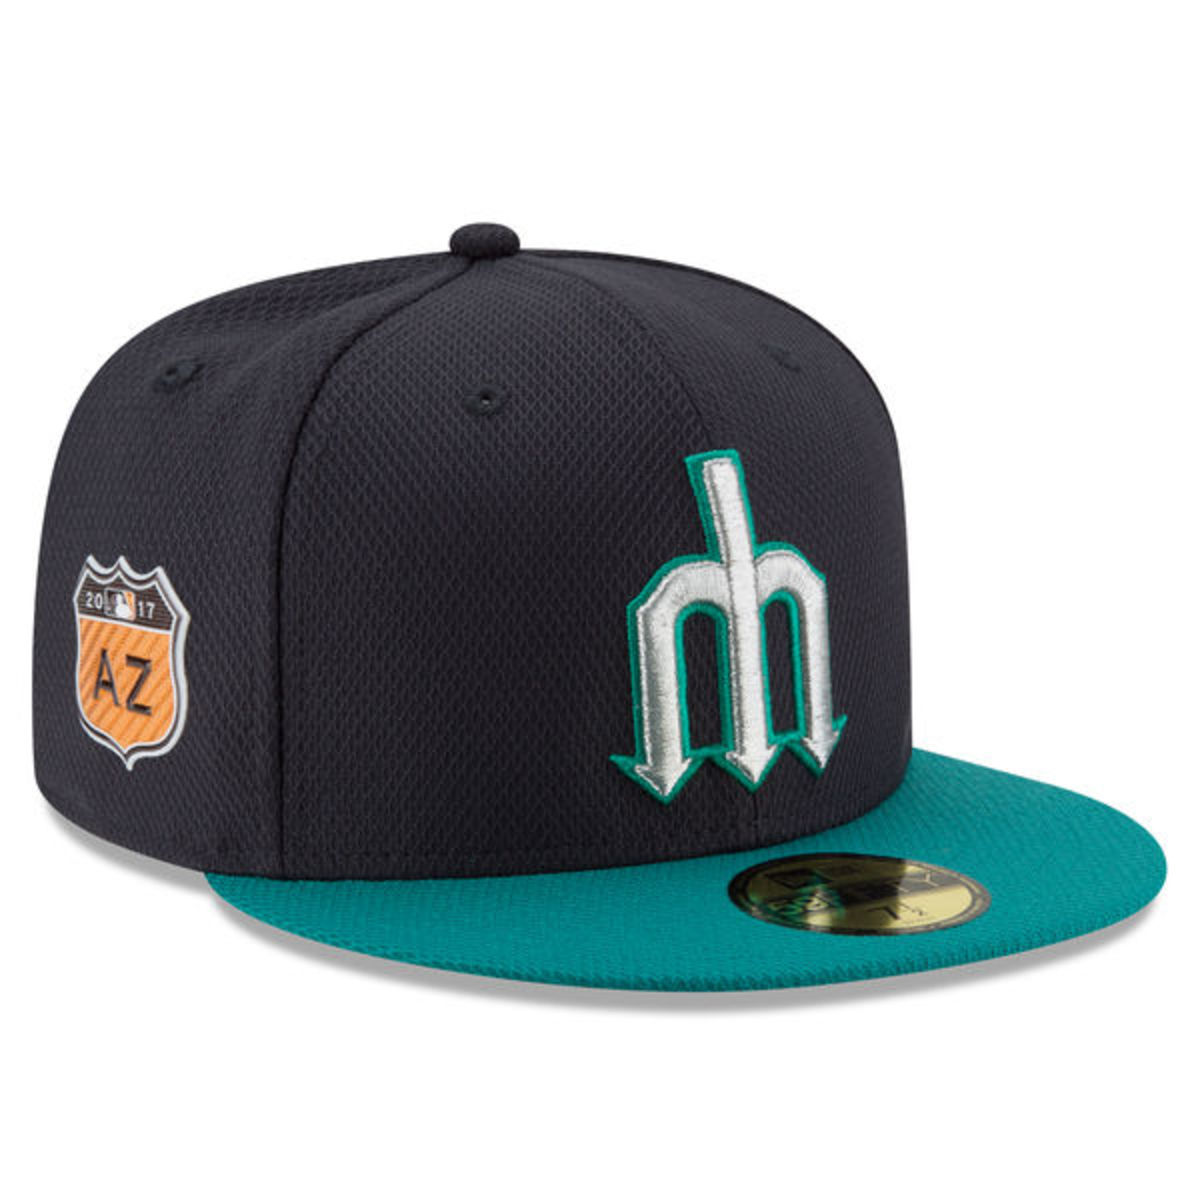 MLB' Spring Training hats: New designs ranked - Sports Illustrated